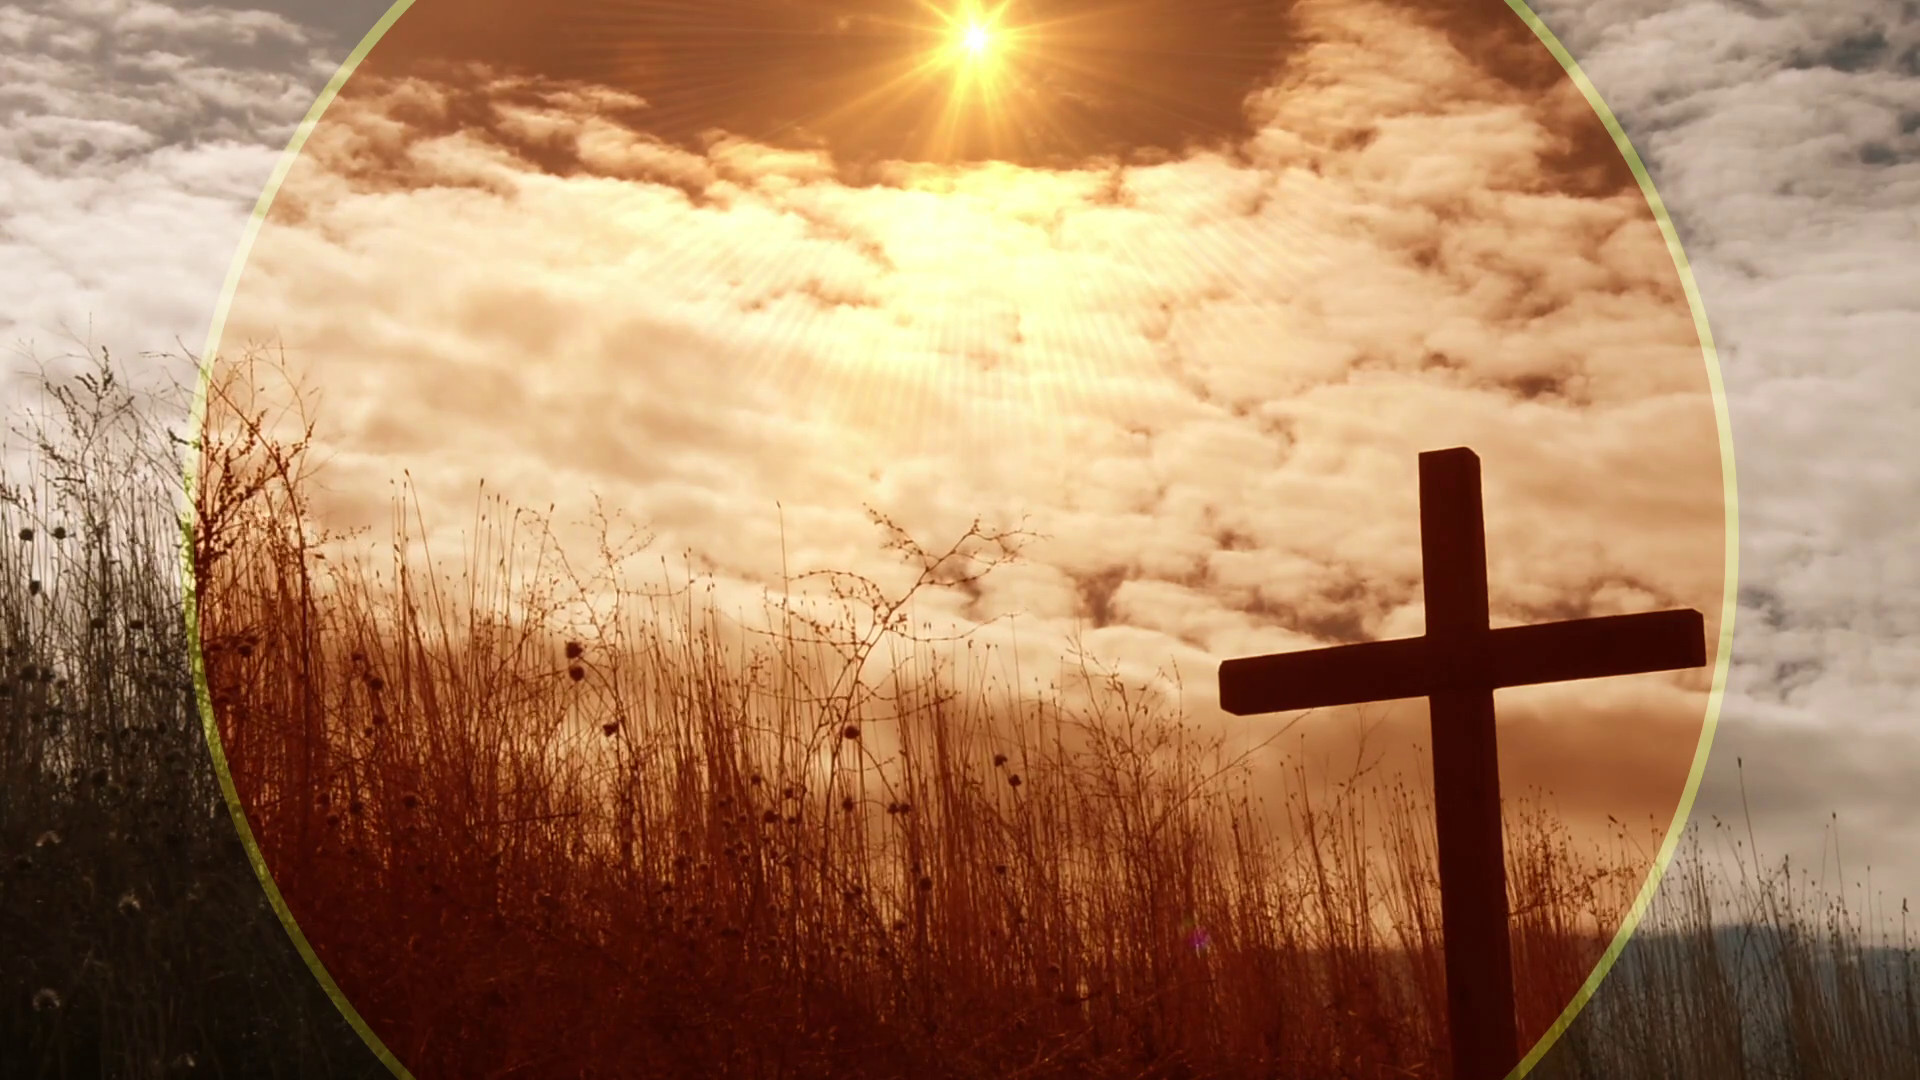 1920x1080 The Cross and halo background HD picture Backgrounds stock photo